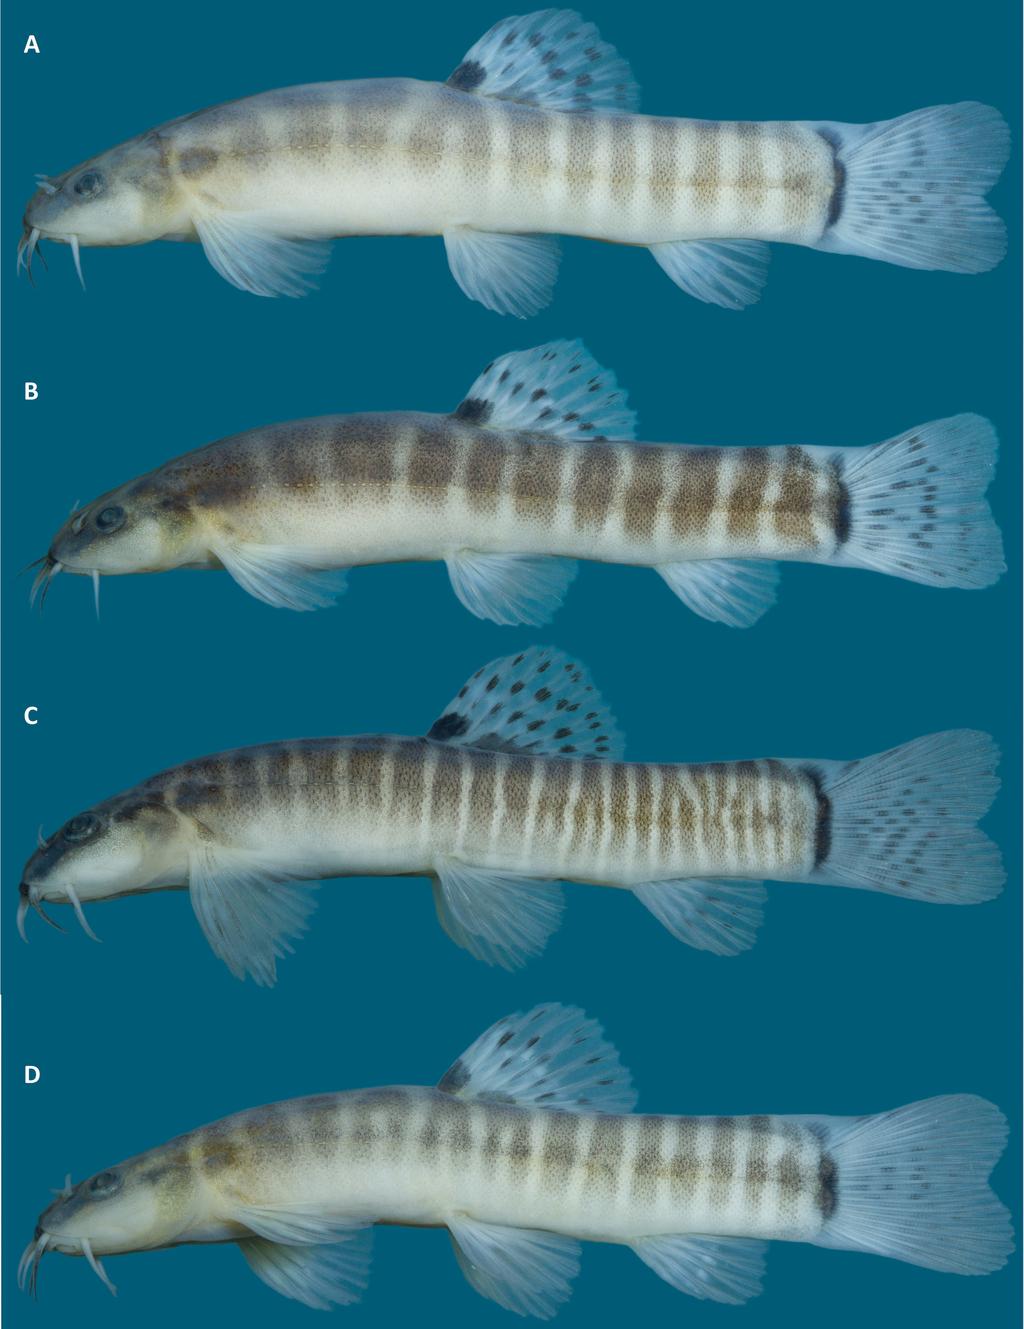 FIGURE 5. Lateral view of paratypes of Schistura scripta, indicating color-pattern variation. A, NH 2018.3.1, 41.7 mm SL; B, DZ3902E, 37.0 mm SL; C, NH 2018.3.2, 35.7 mm SL; D, NH 2018.3.3, 32.